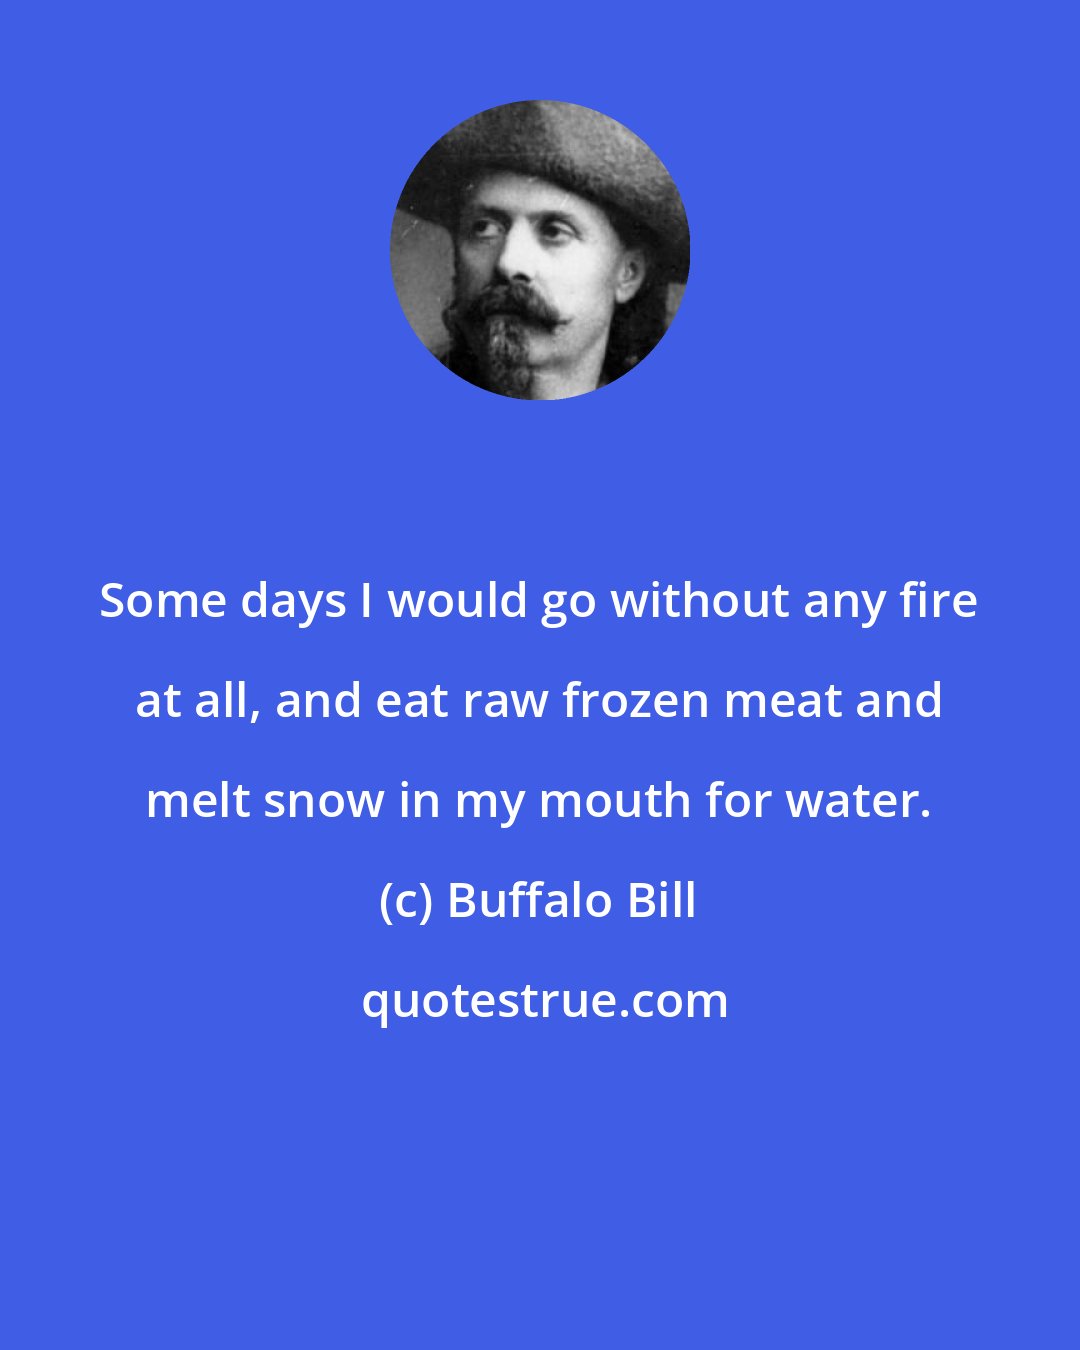 Buffalo Bill: Some days I would go without any fire at all, and eat raw frozen meat and melt snow in my mouth for water.